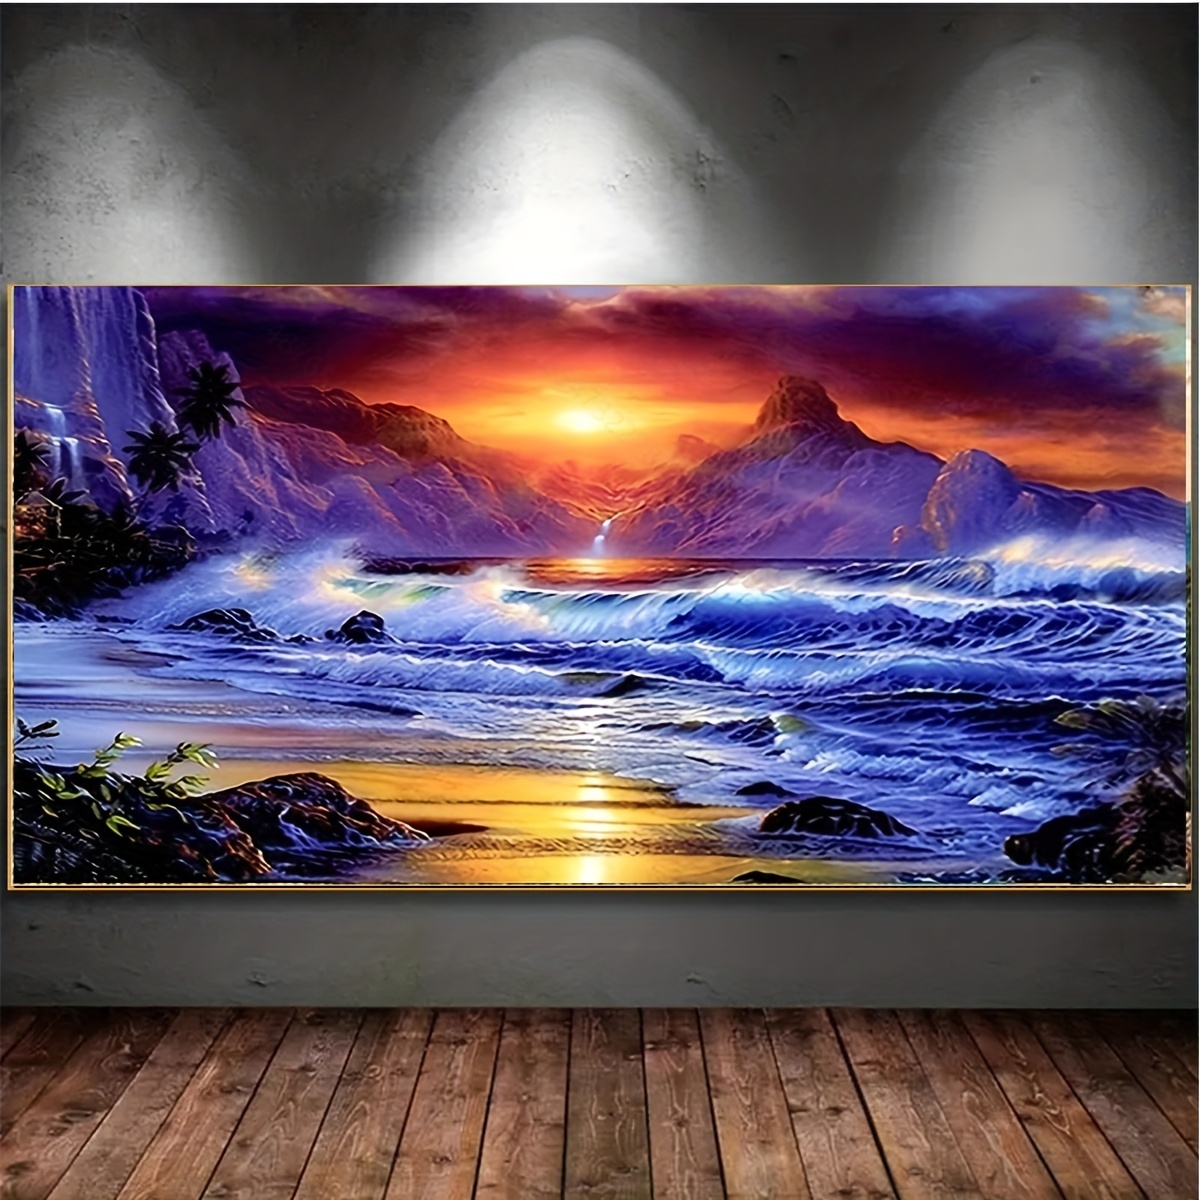 Sunset Whales Diamond Painting Kit with Free Shipping – 5D Diamond Paintings